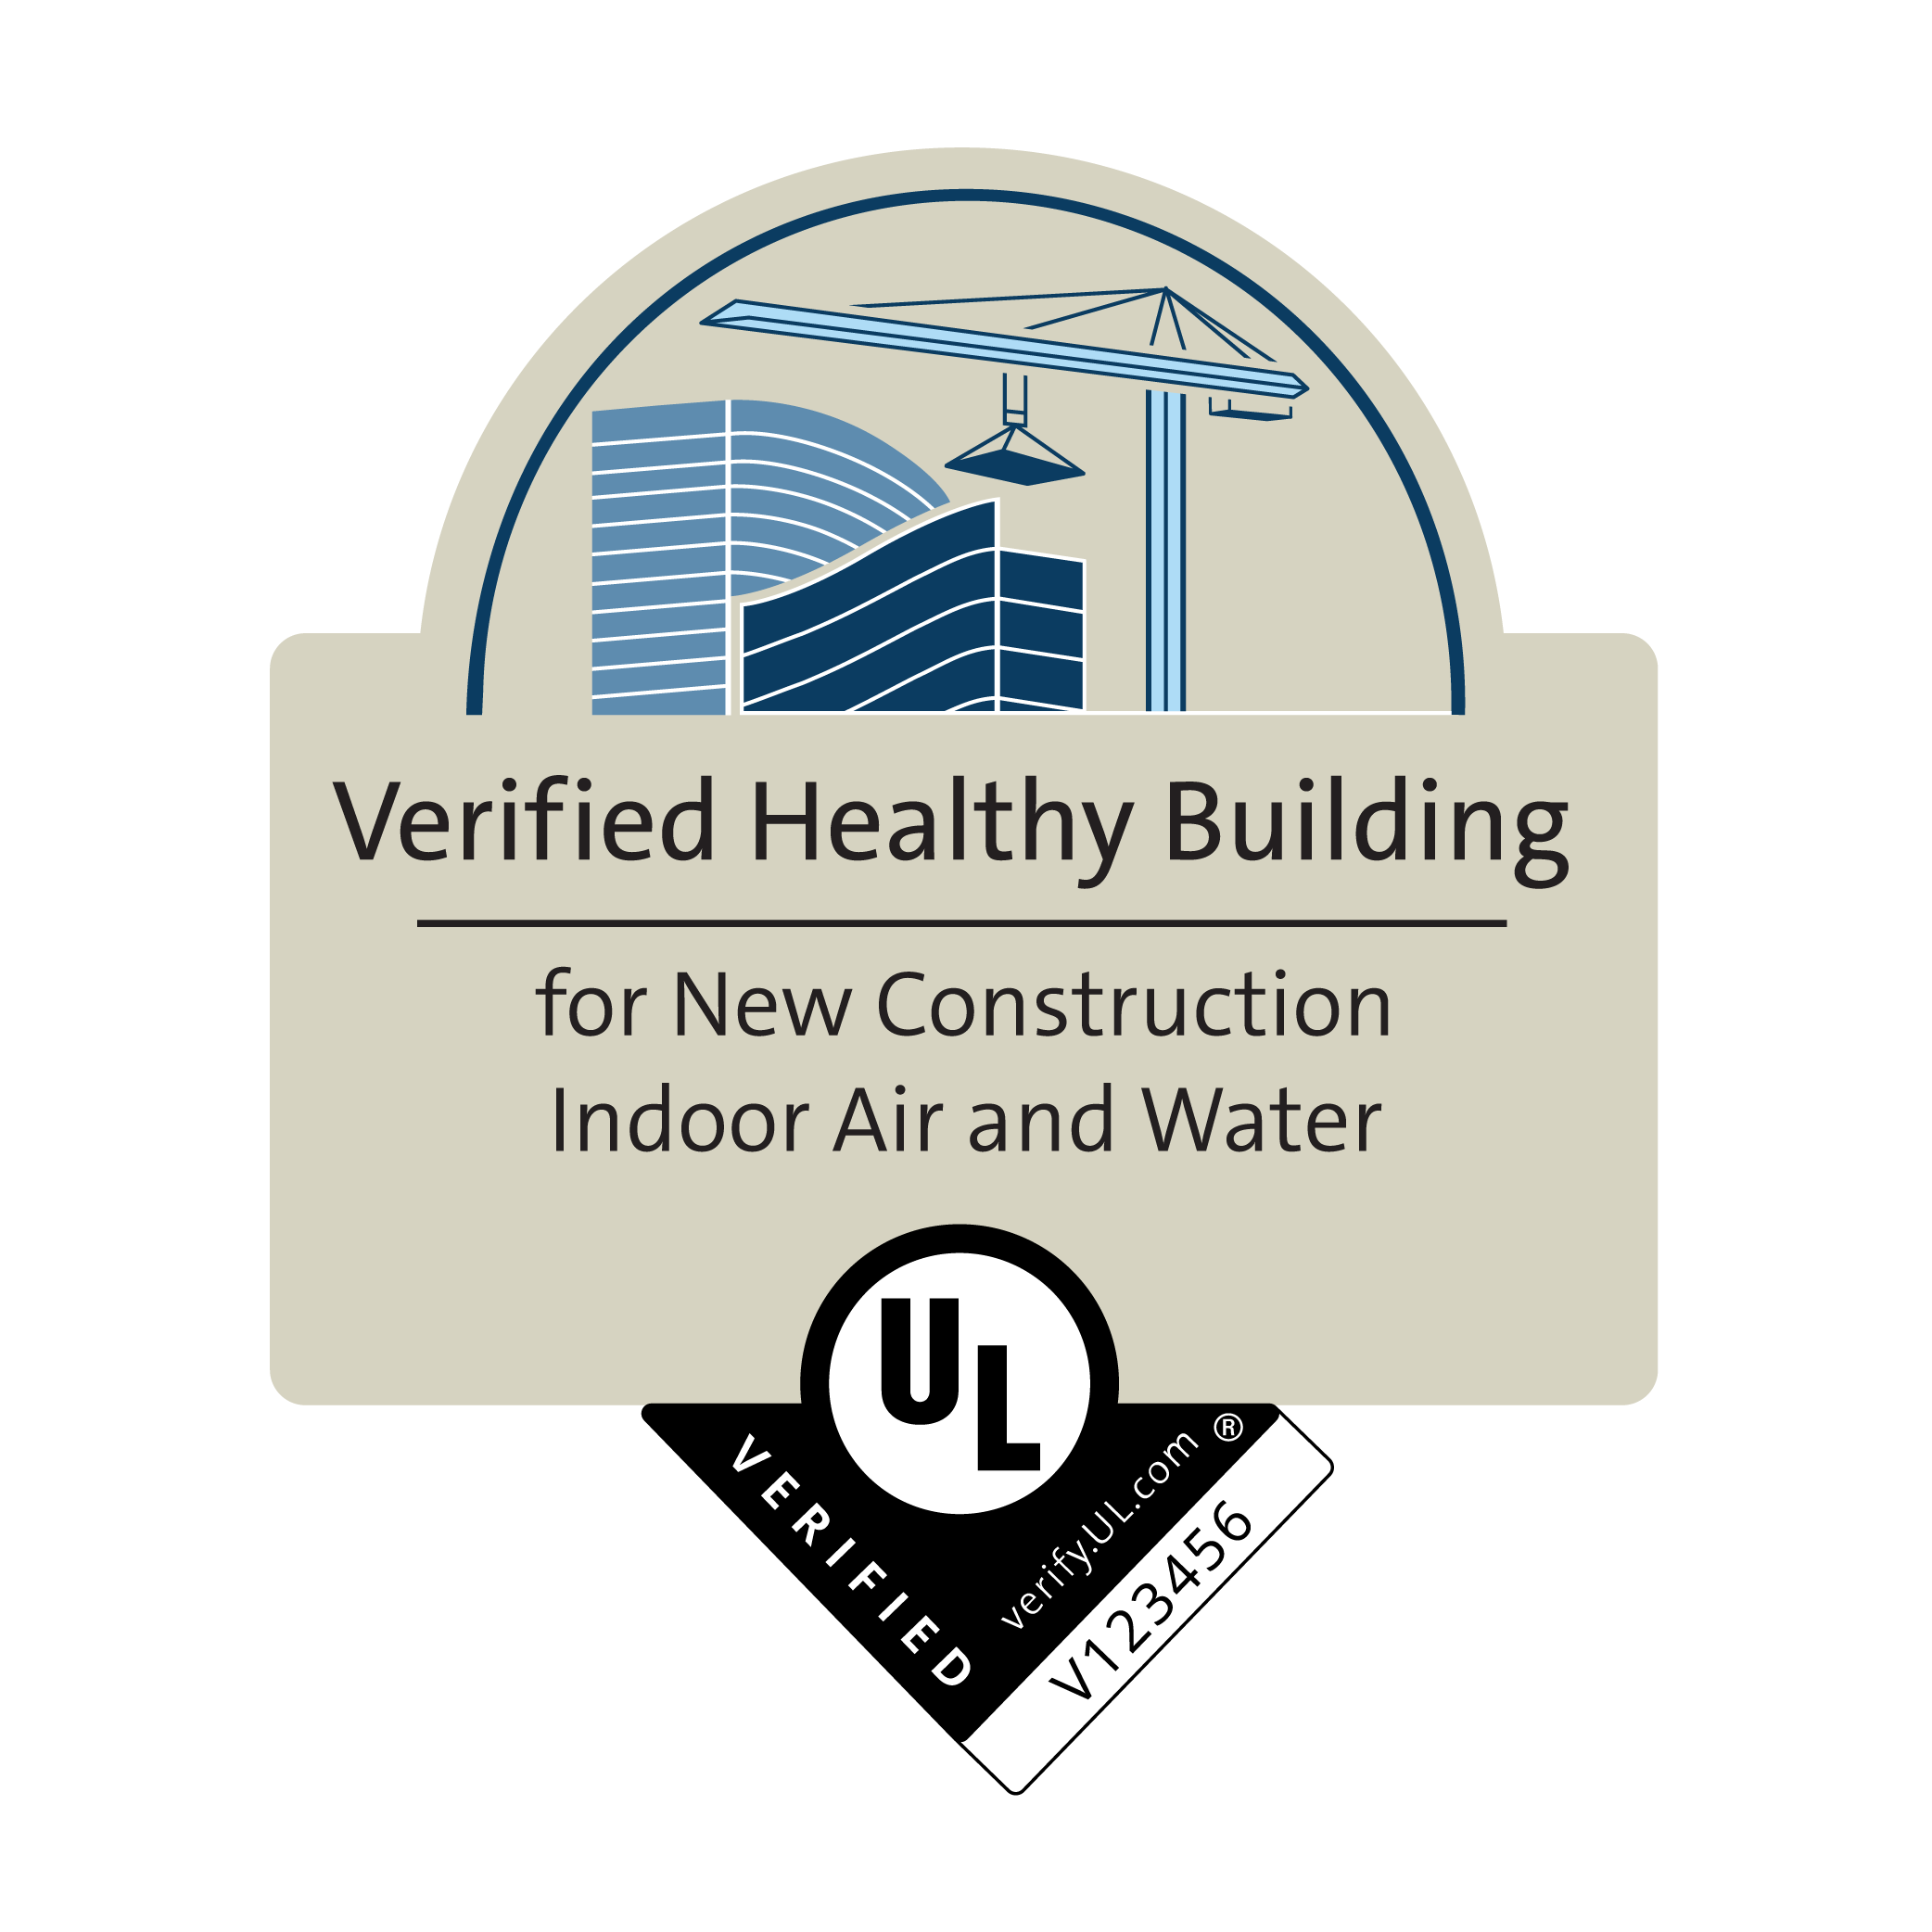 Verification Mark Healthy Building New Construction Indoor Air Water.